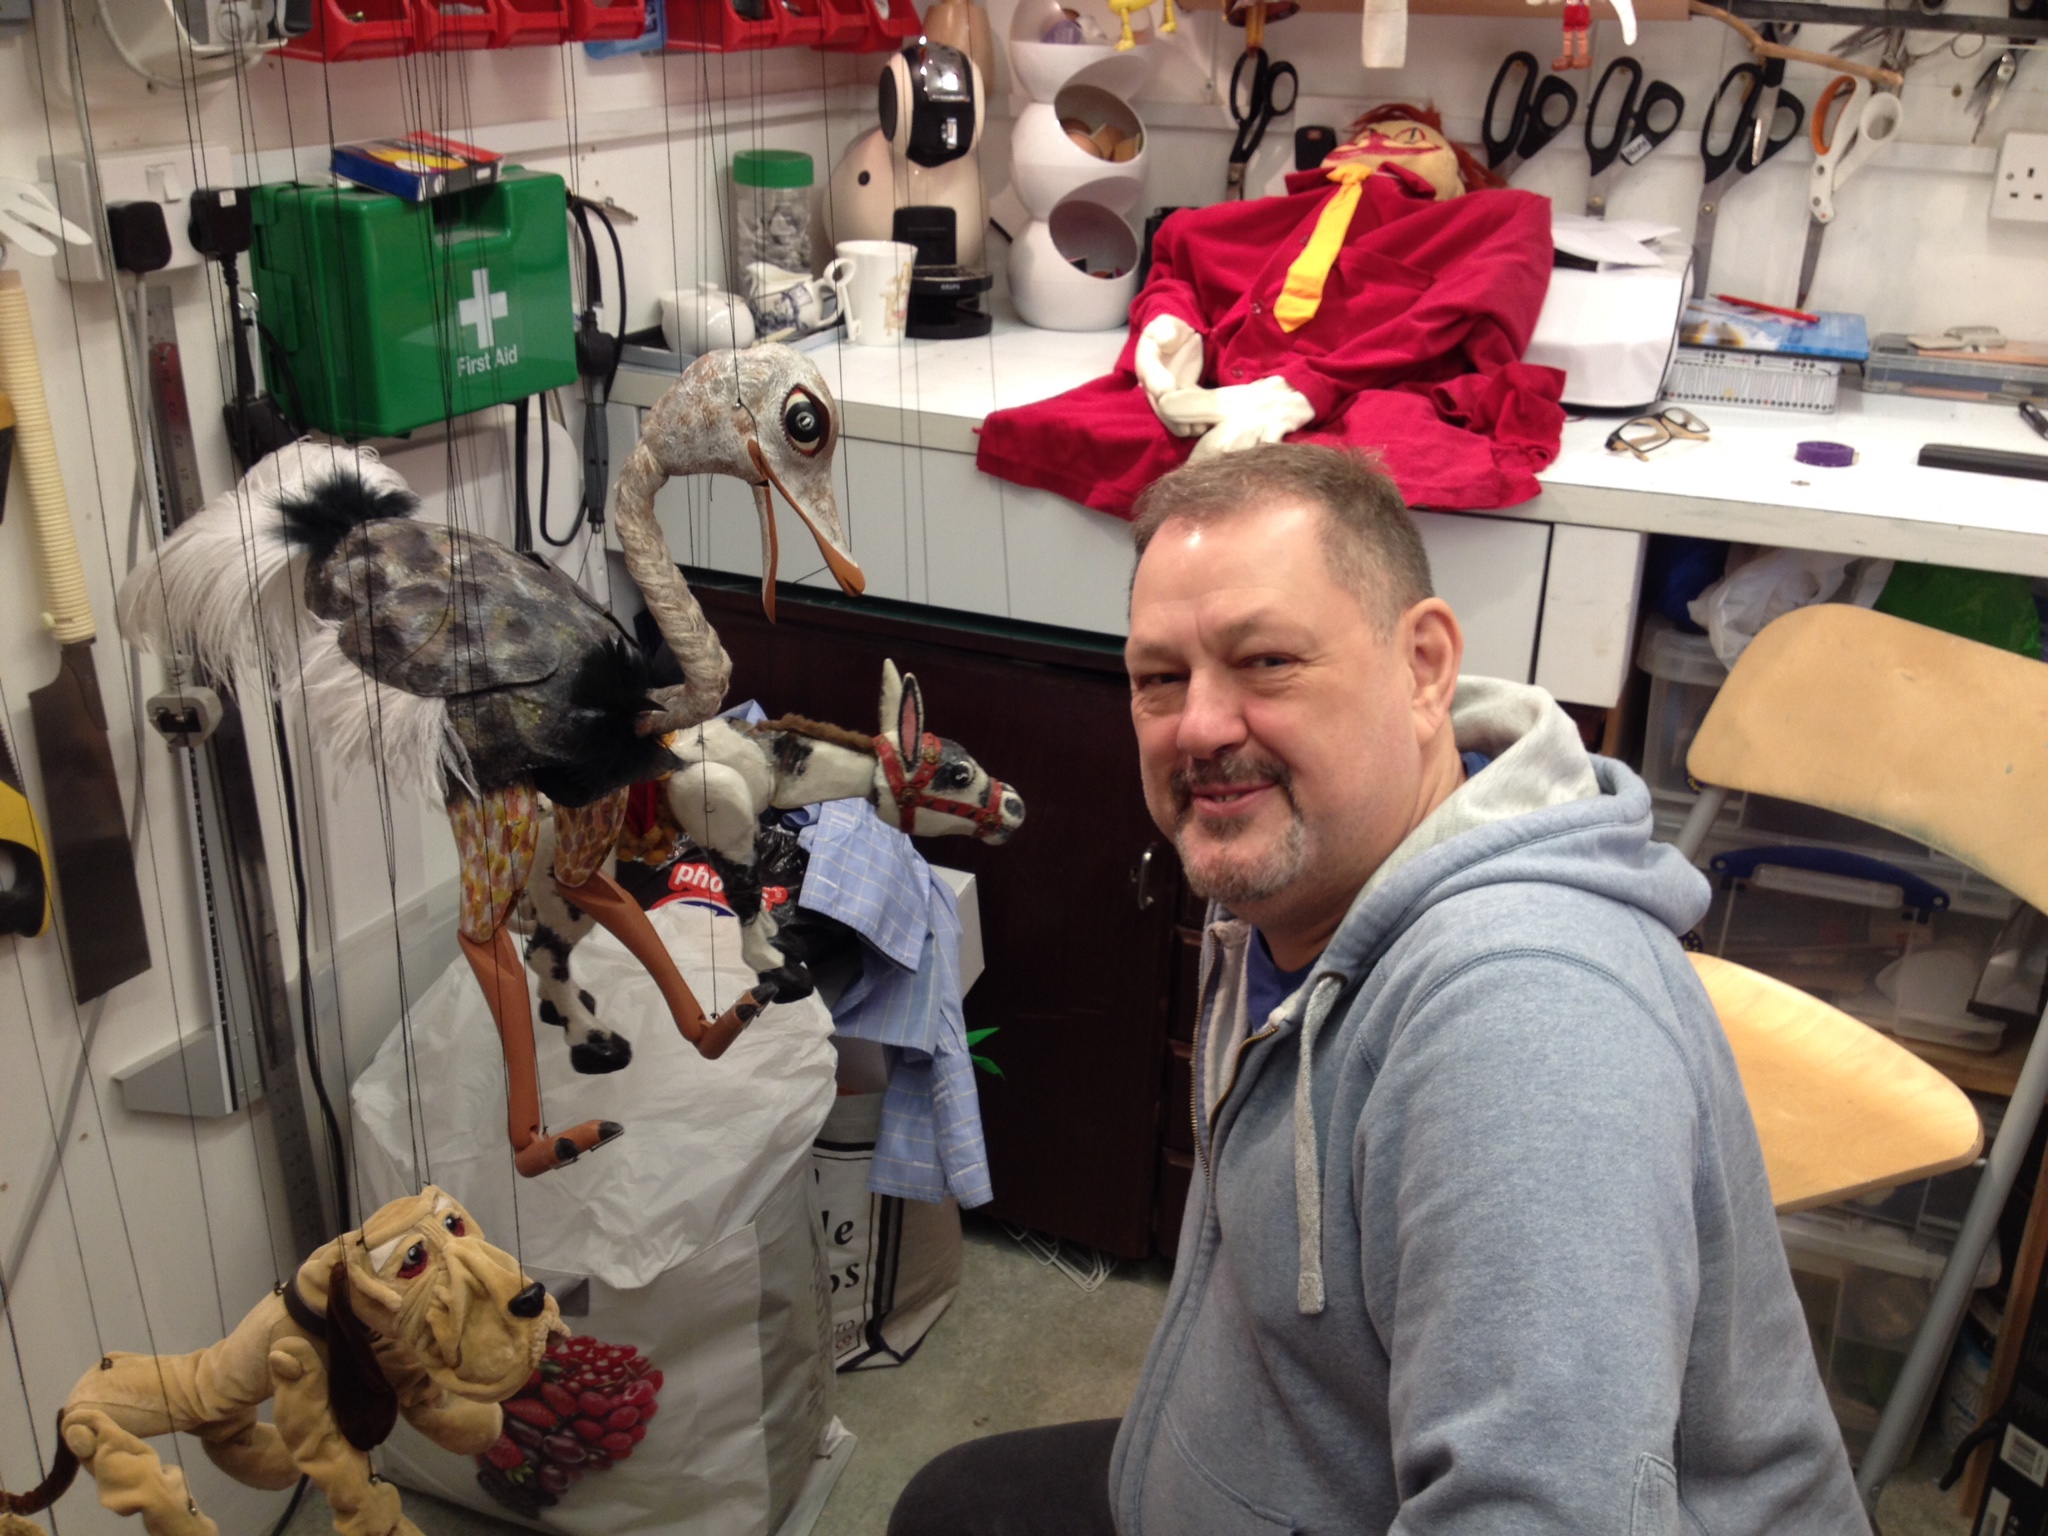 Keith Frederick working on the new and old Muffin puppets